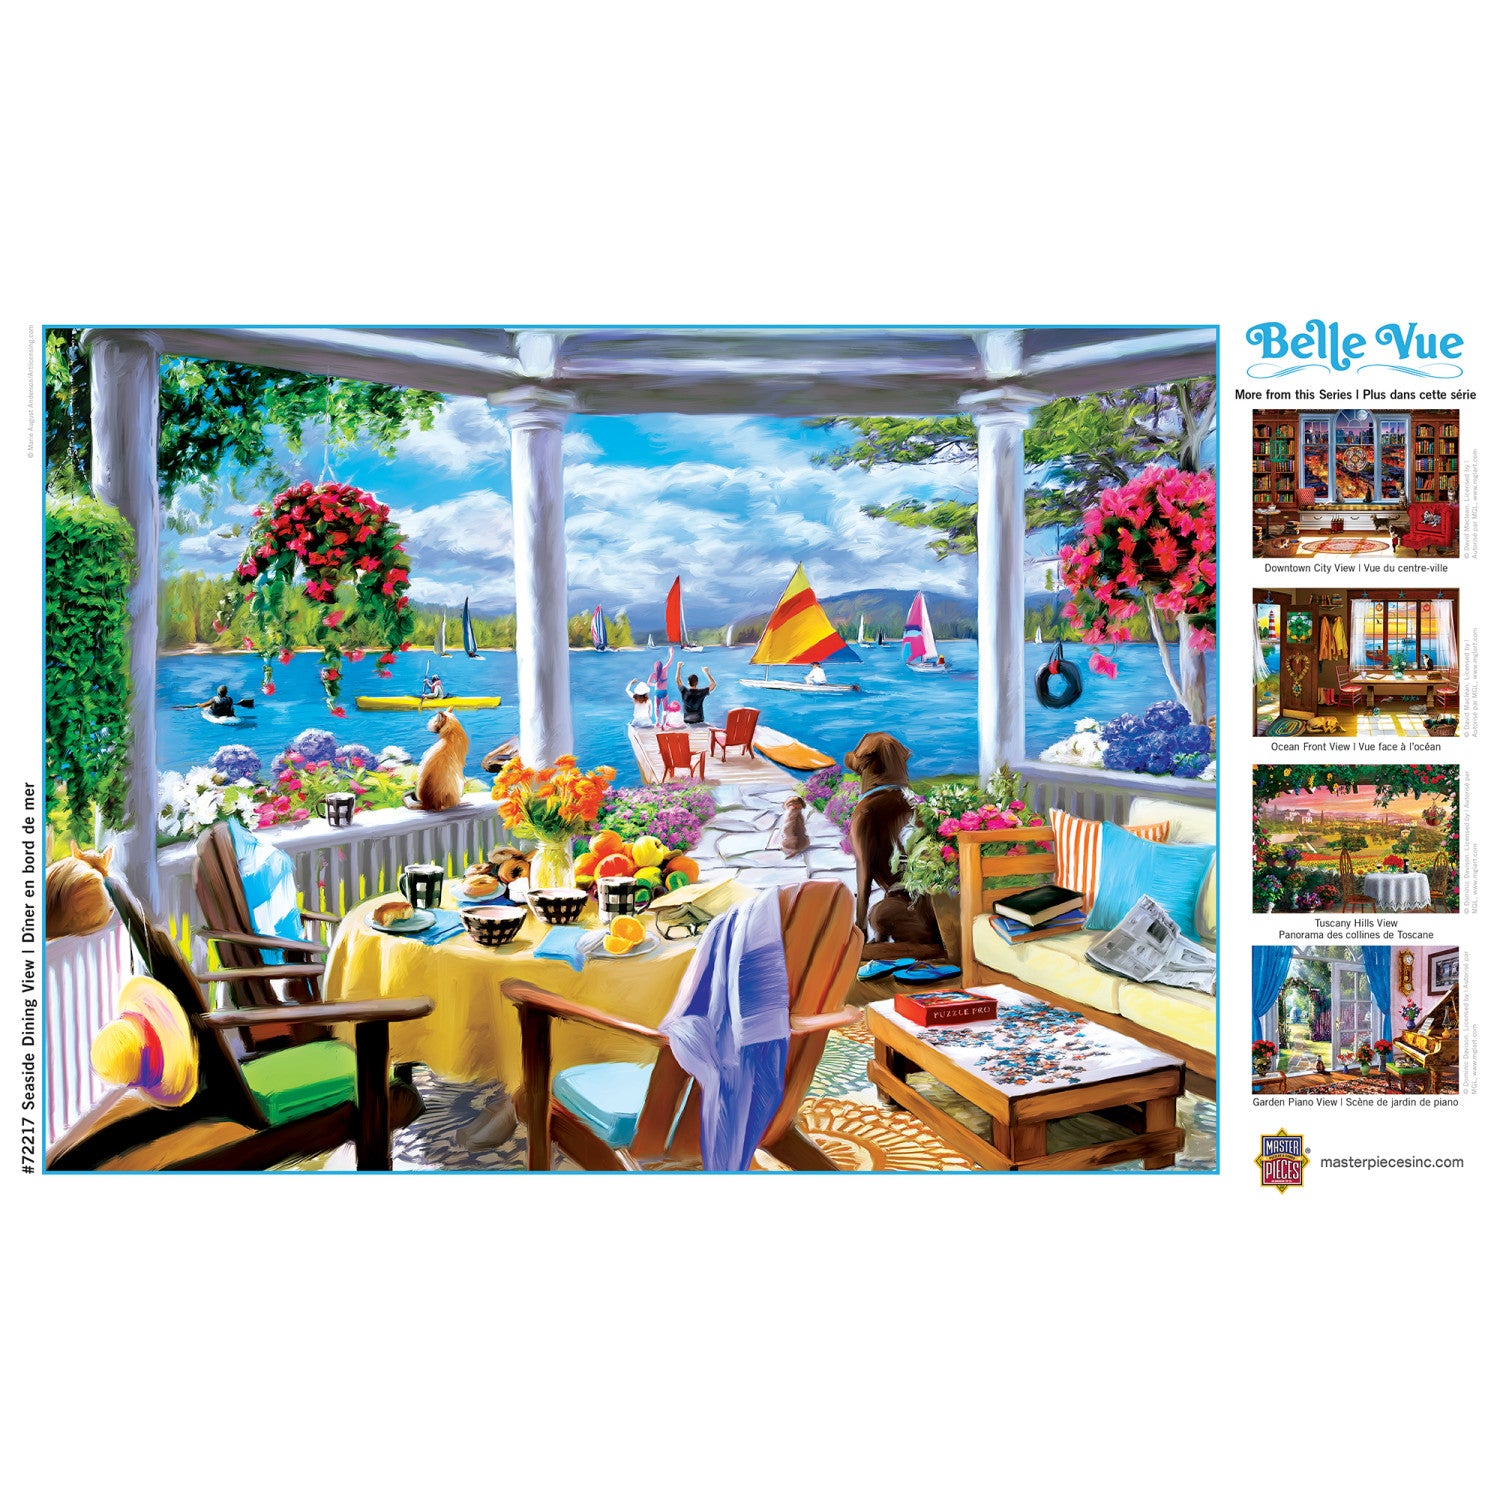 Belle Vue - Seaside Dining View 1000 Piece Jigsaw Puzzle